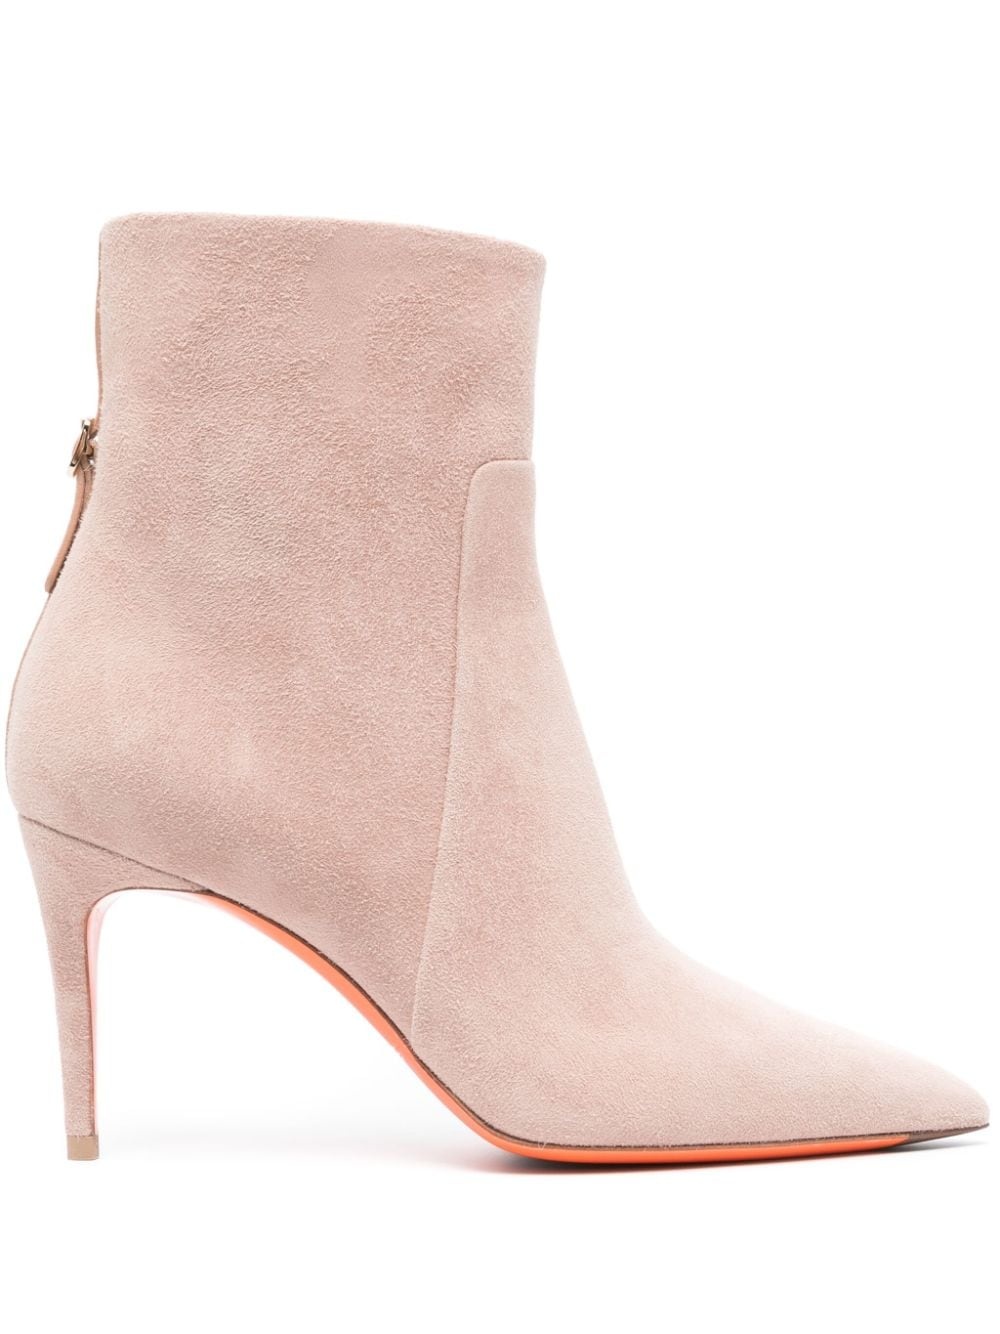 65mm suede ankle boots - 1